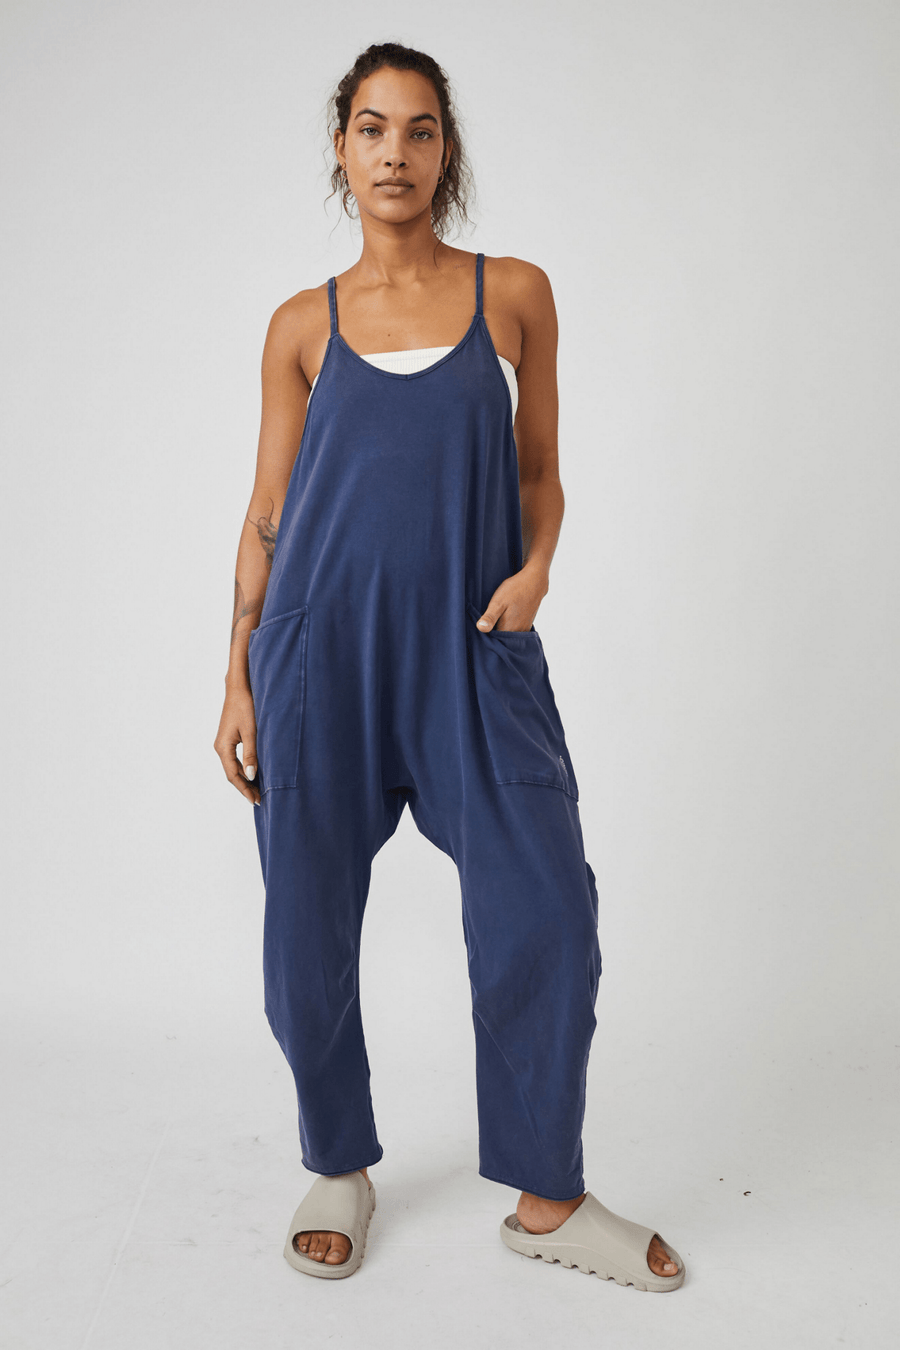 Hot Shot Onesie by Free People - Supernova - Blue Sky Fashions & Lingerie